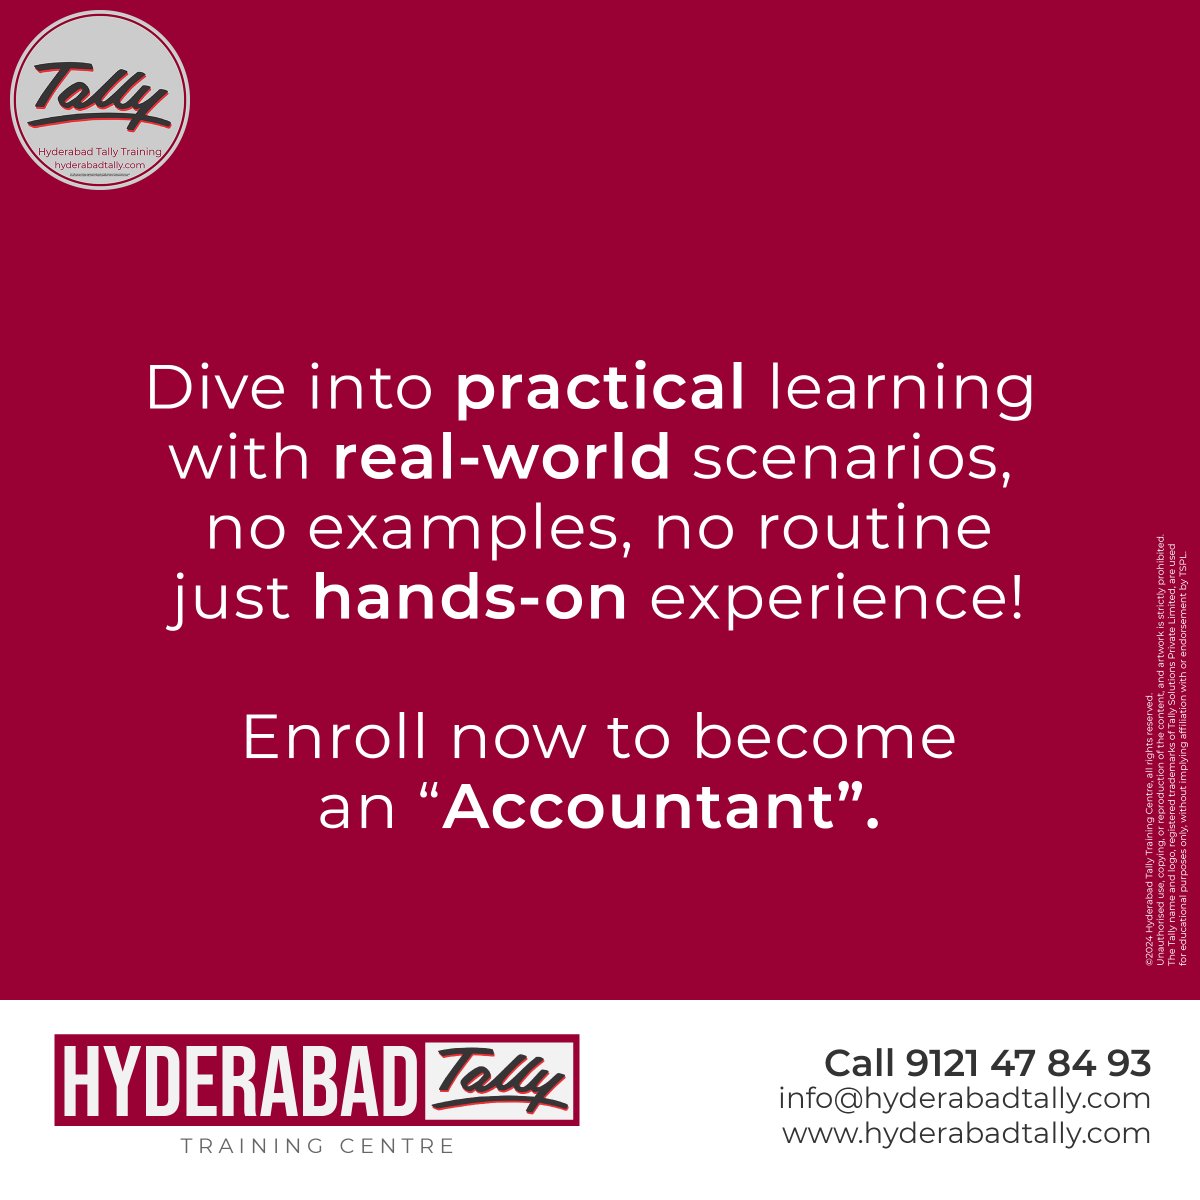 Dive into practical learning with Hyderabad Tally Training! Gain hands-on experience with TallyPrime software and real-time data. Earn an Internship Certificate for job readiness. Enroll at 9121478493 📞 info@hyderabadtally.com 📧 #TallyTraining #PracticalLearning #HyderabadTally